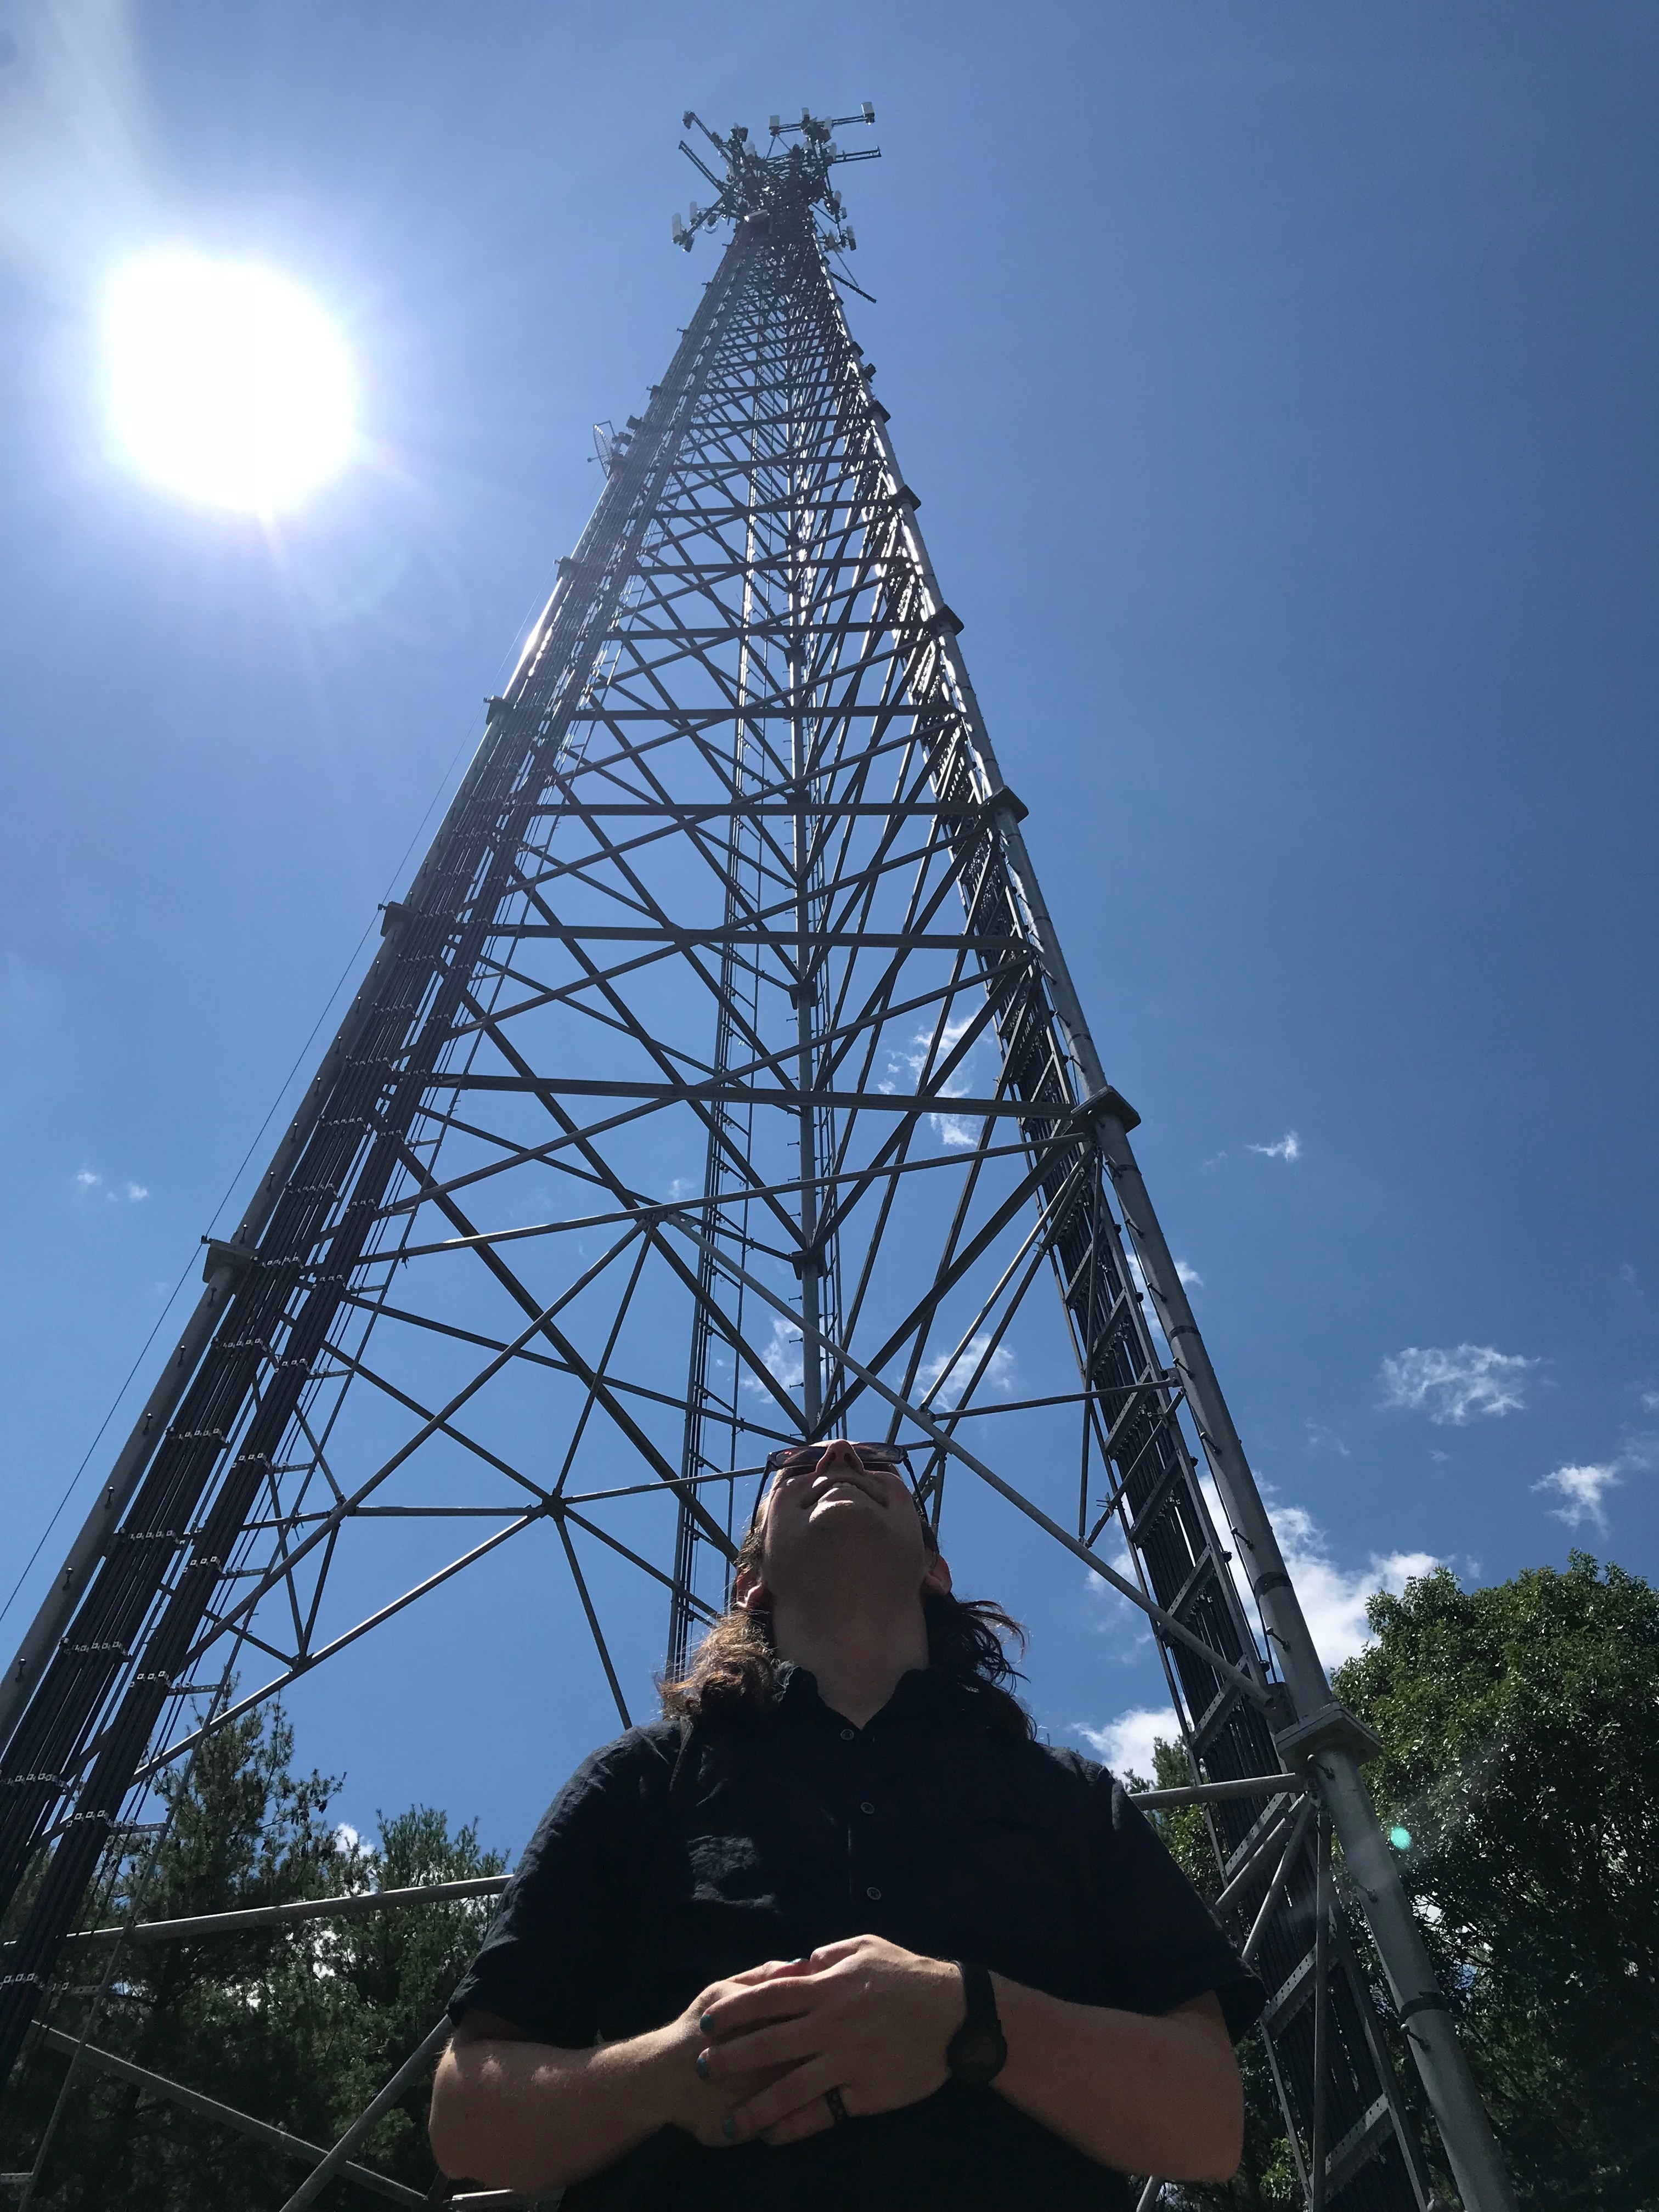 N. Adriana Knouf at WXGC's Tower Site in Leeds, NY